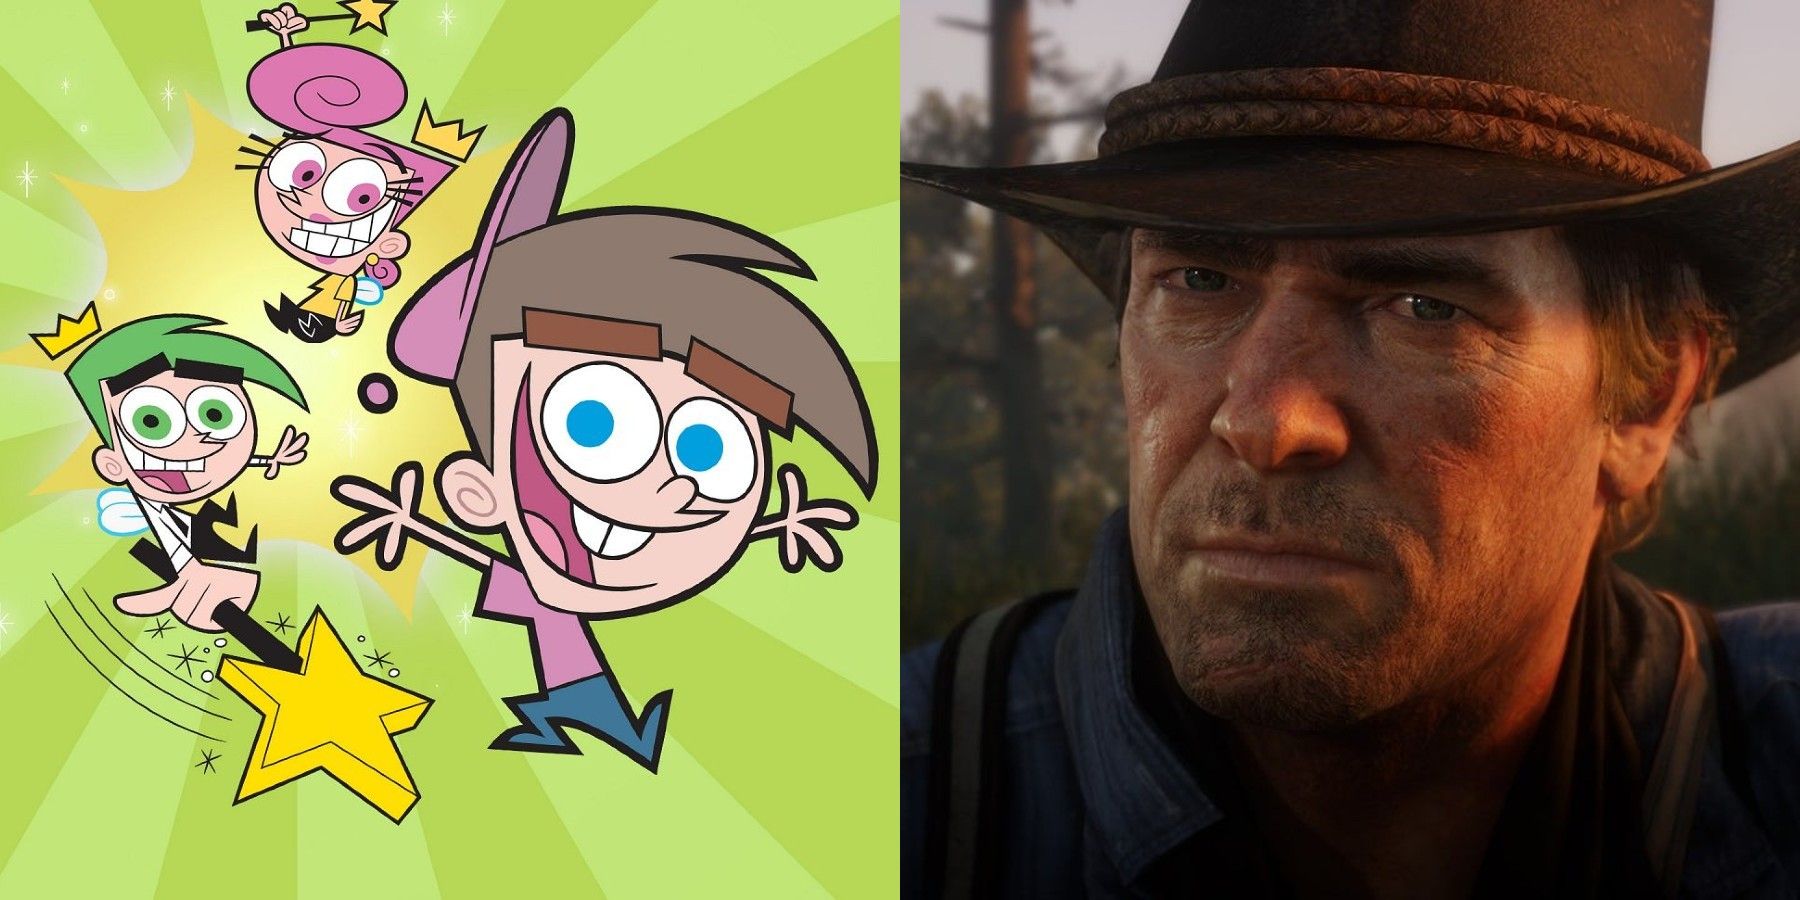 Butch Hartman Draws Arthur Morgan From Red Dead Redemption 2 in Fairly OddParents Art Style